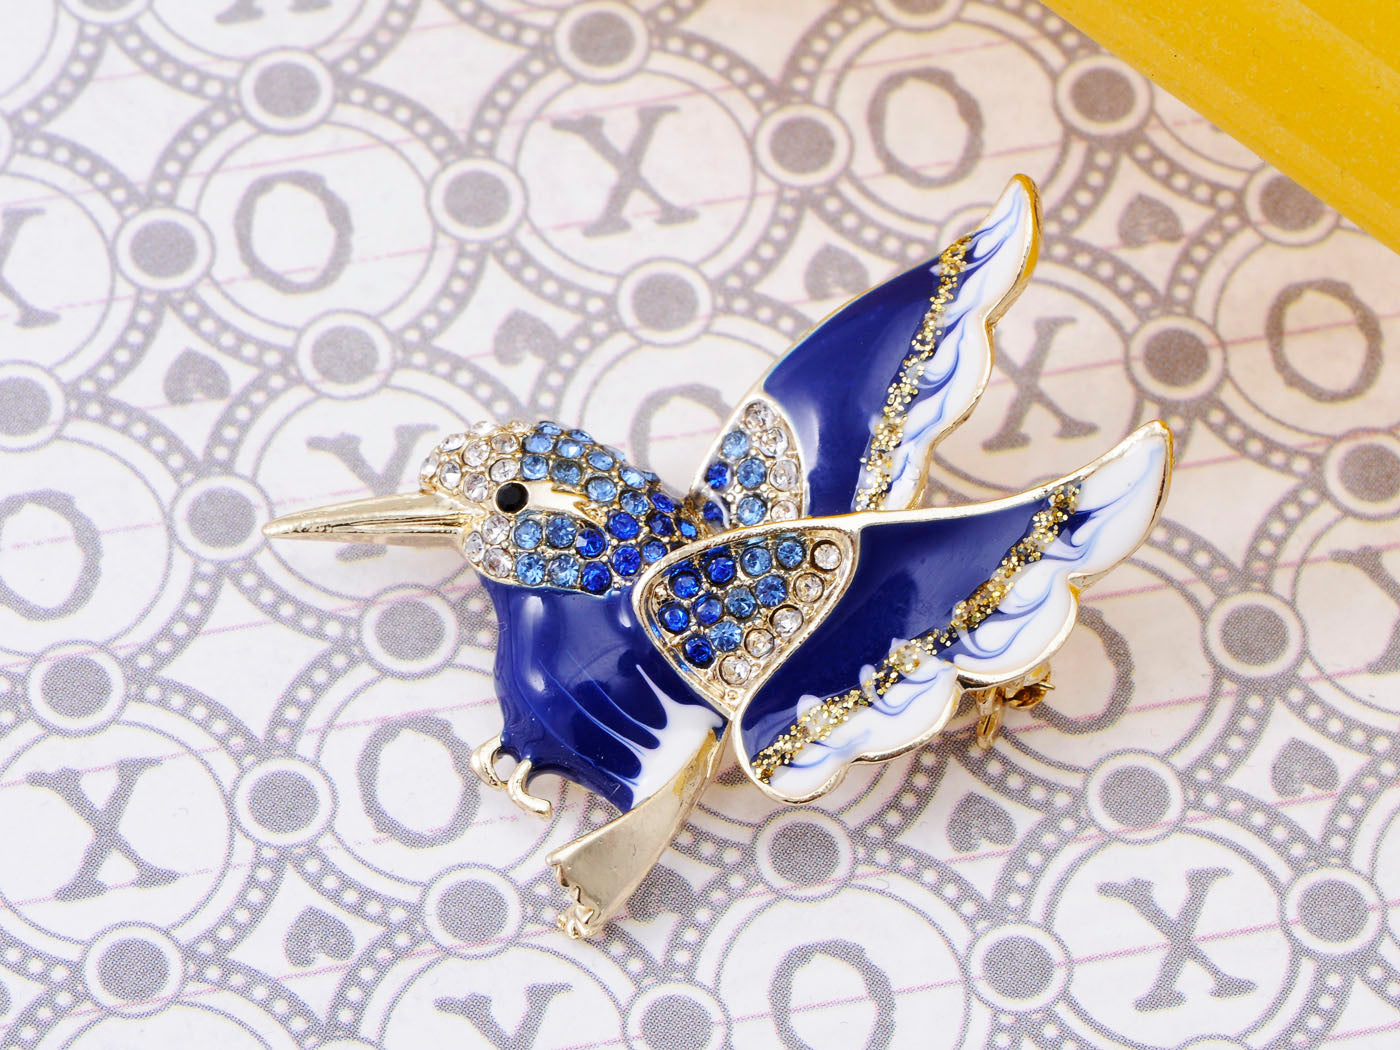 Accented Enamel Painted Winged Bird Pin Brooch